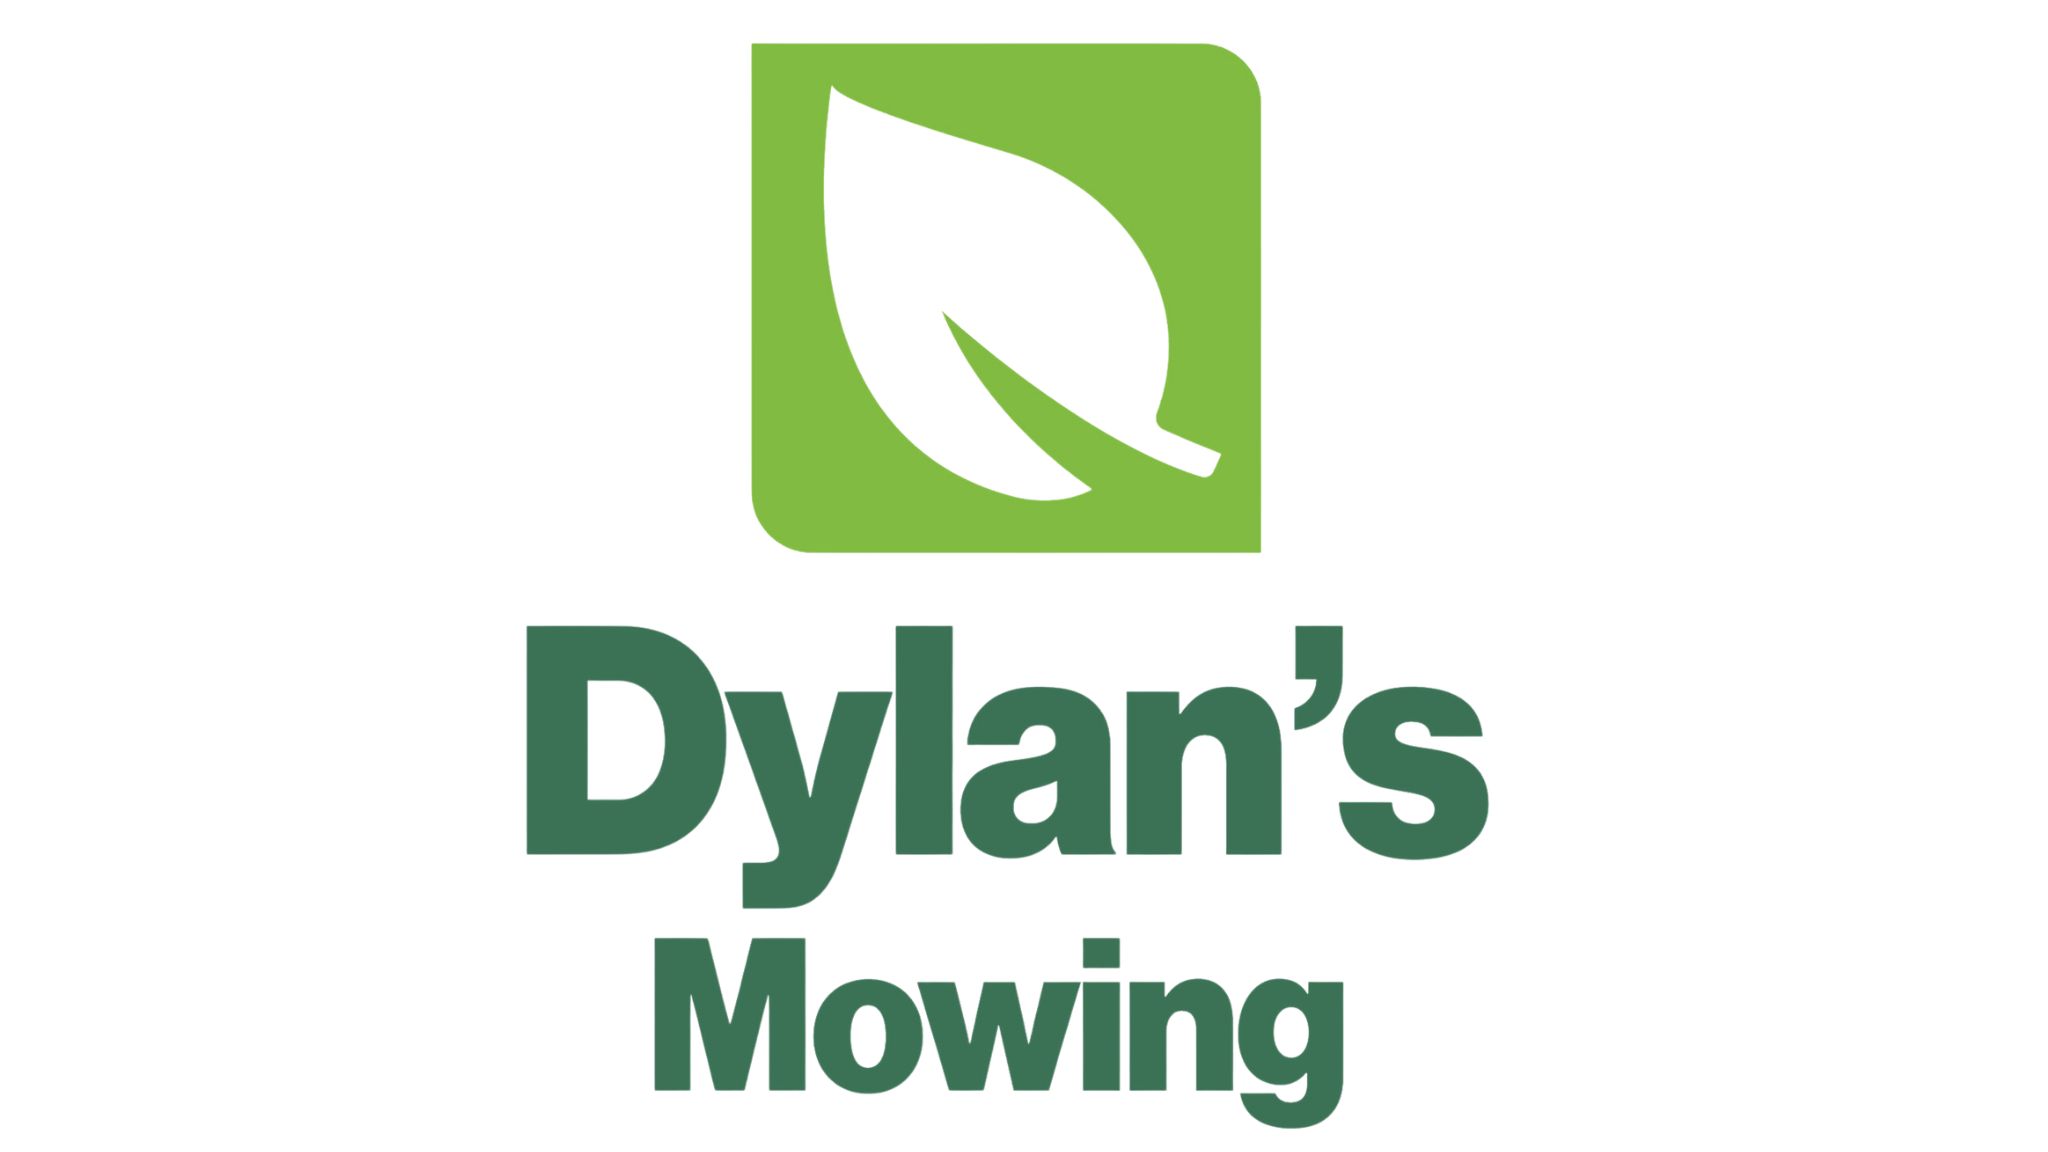 Dylan's Mowing